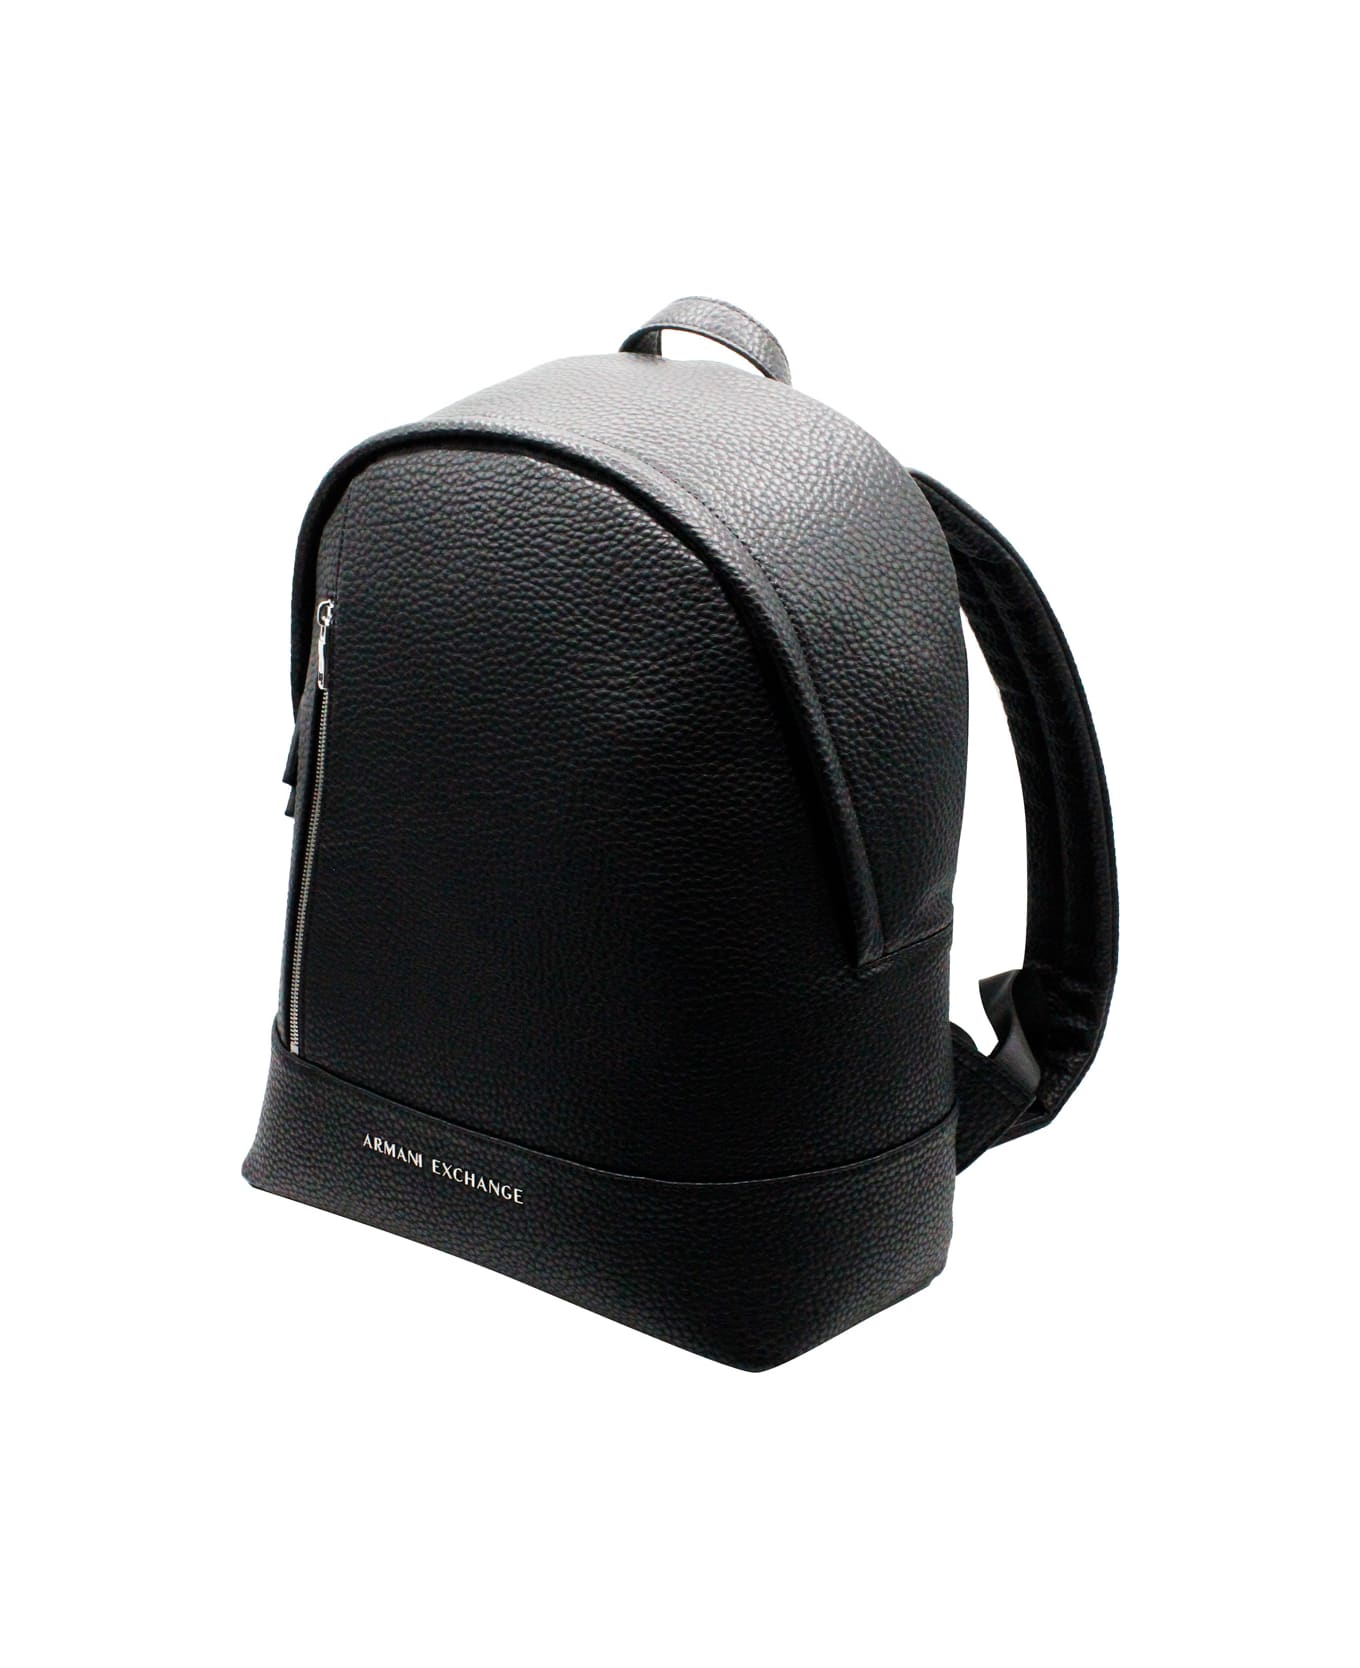 Armani Collezioni Backpack In Very Soft Soft Grain Eco-leather With Logo On The Front. Adjustable Shoulder Straps. Measures 38x32x12 Cm - Black バックパック